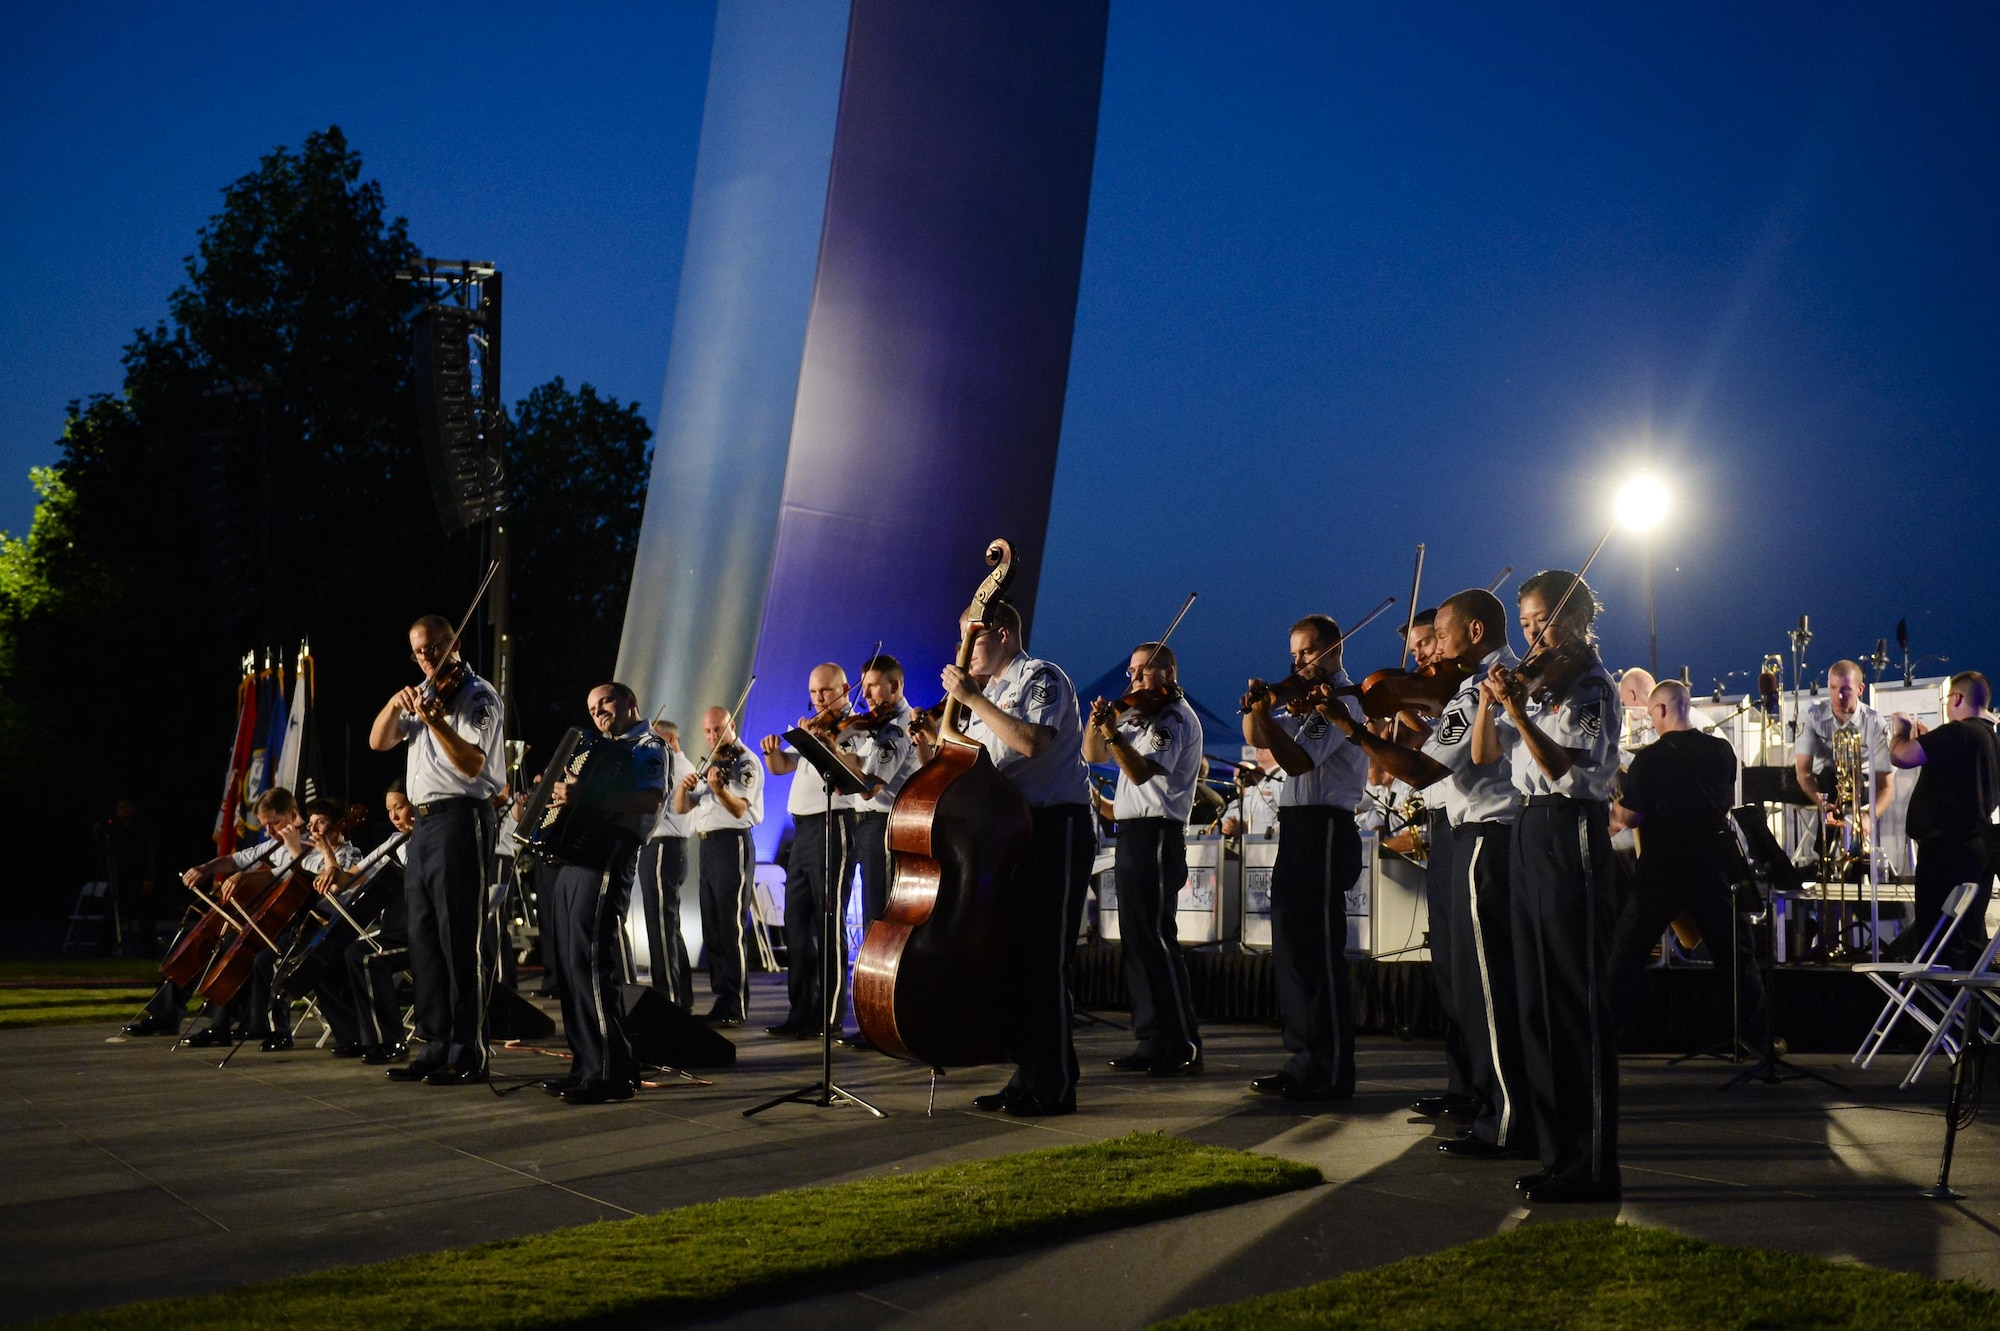 The U.S. Air Force Band performs in a public concert at the Air Force Memorial to honor Vietnam War veterans Aug. 26, 2016, in Arlington, Va. Prior to attending the concert, Air Force Undersecretary Lisa S. Disbrow and Chief of Staff Gen. Dave Goldfein welcomed Gen. Stephen W. Wilson as the service's new vice chief of staff at a reception in the Fort Myer Officer's Club. (U.S. Air Force photo/Tech. Sgt. Joshua L. DeMotts)                                                                                    